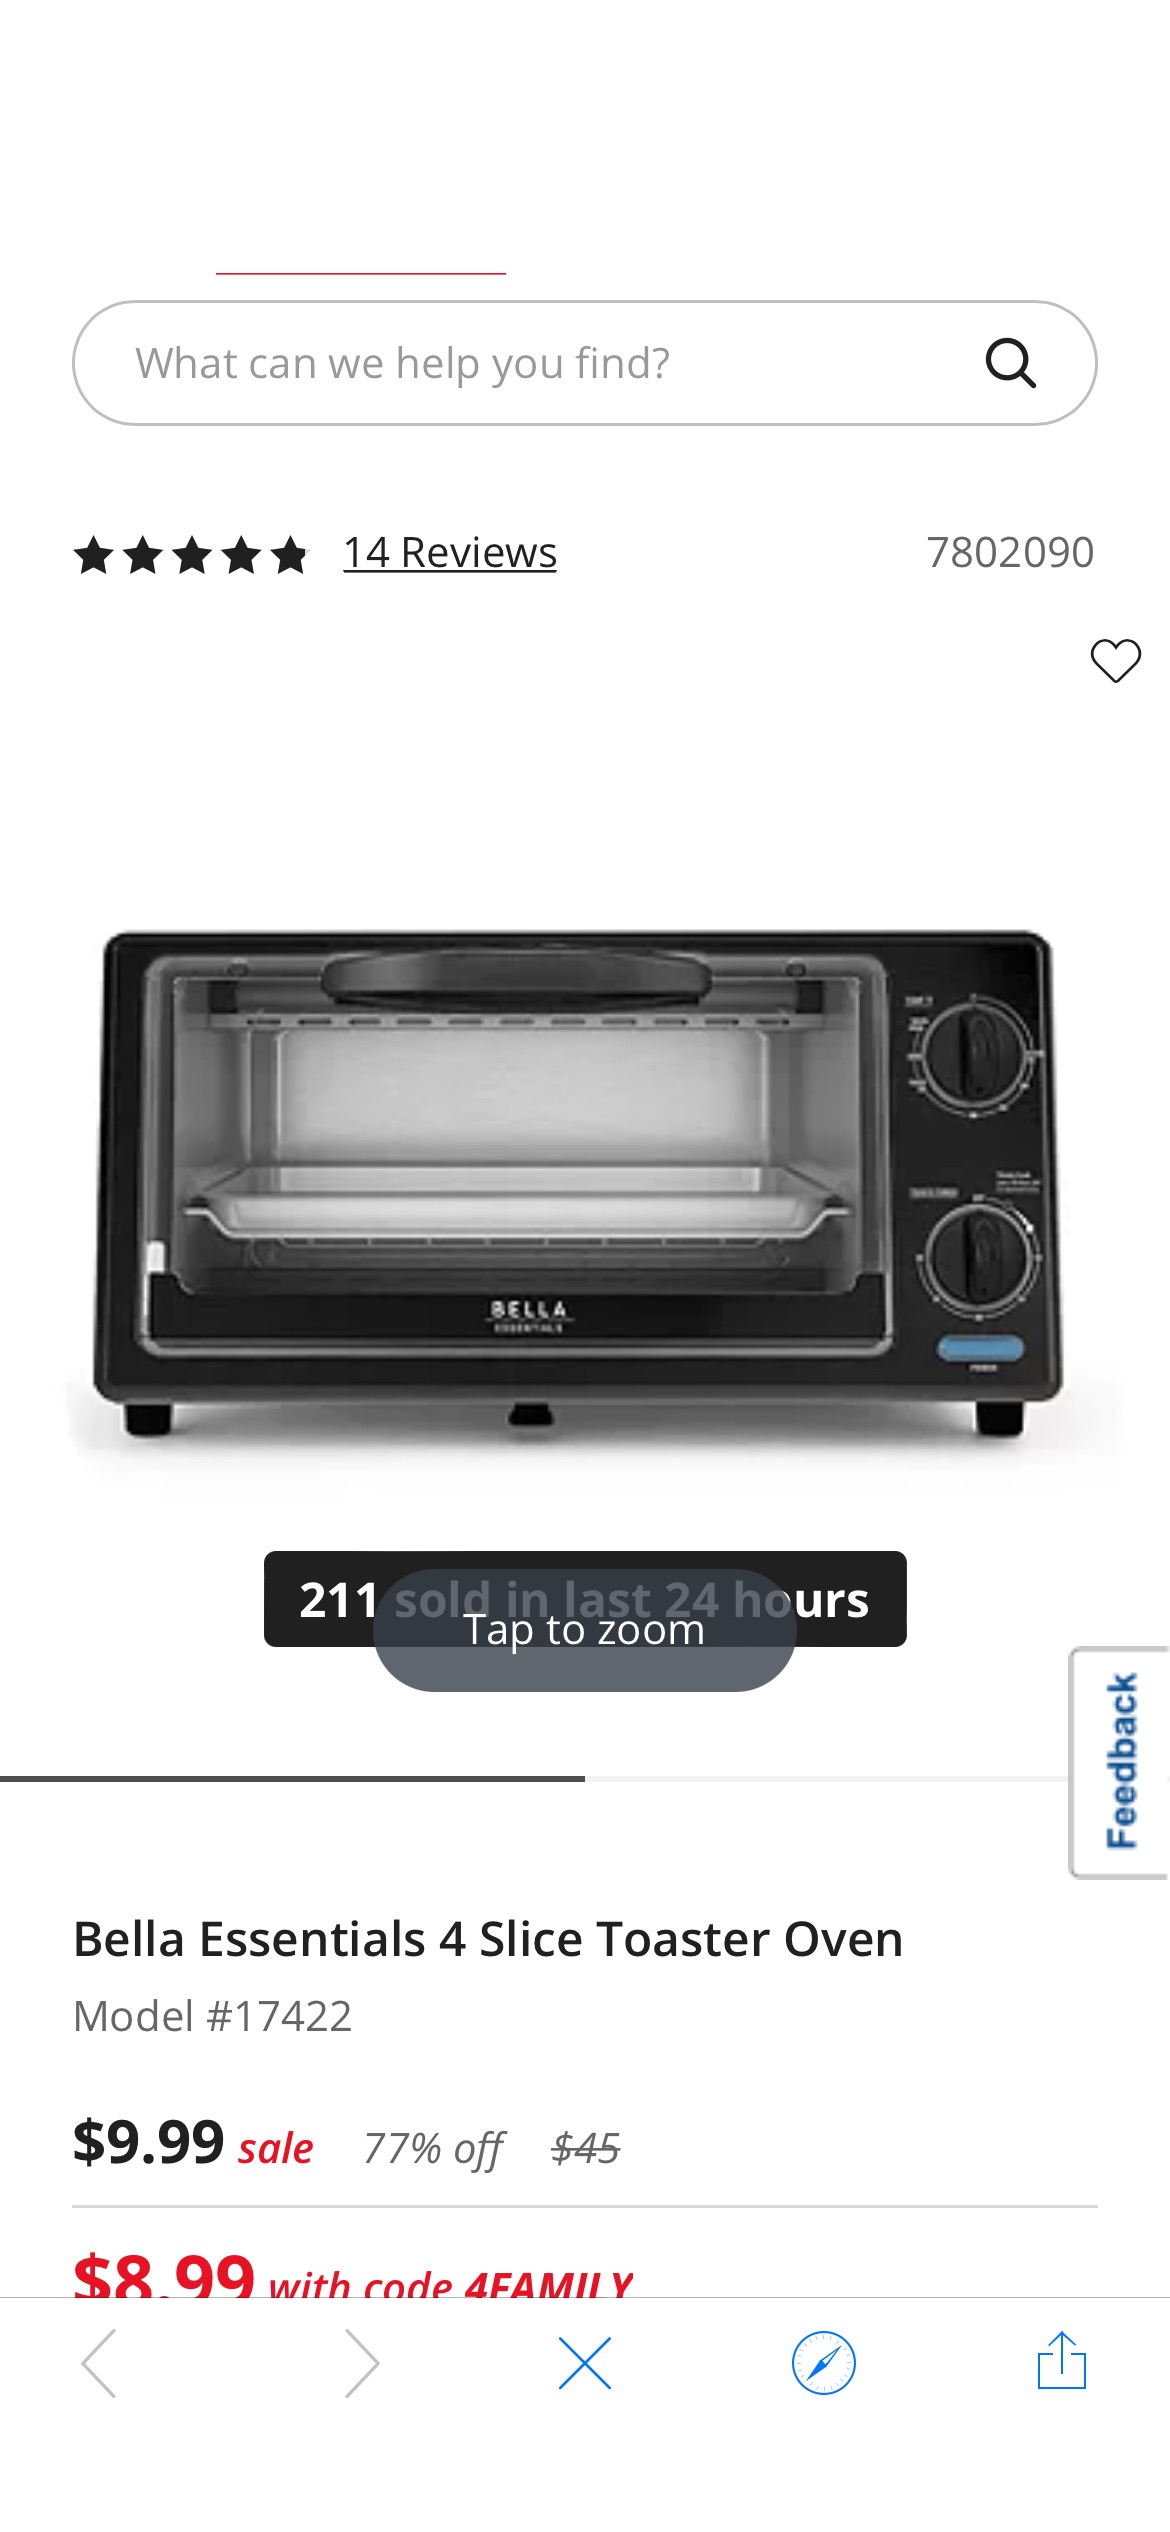 Bella Essentials 4 Slice Toaster Oven 烤箱17422, Color: Black - JCPenney